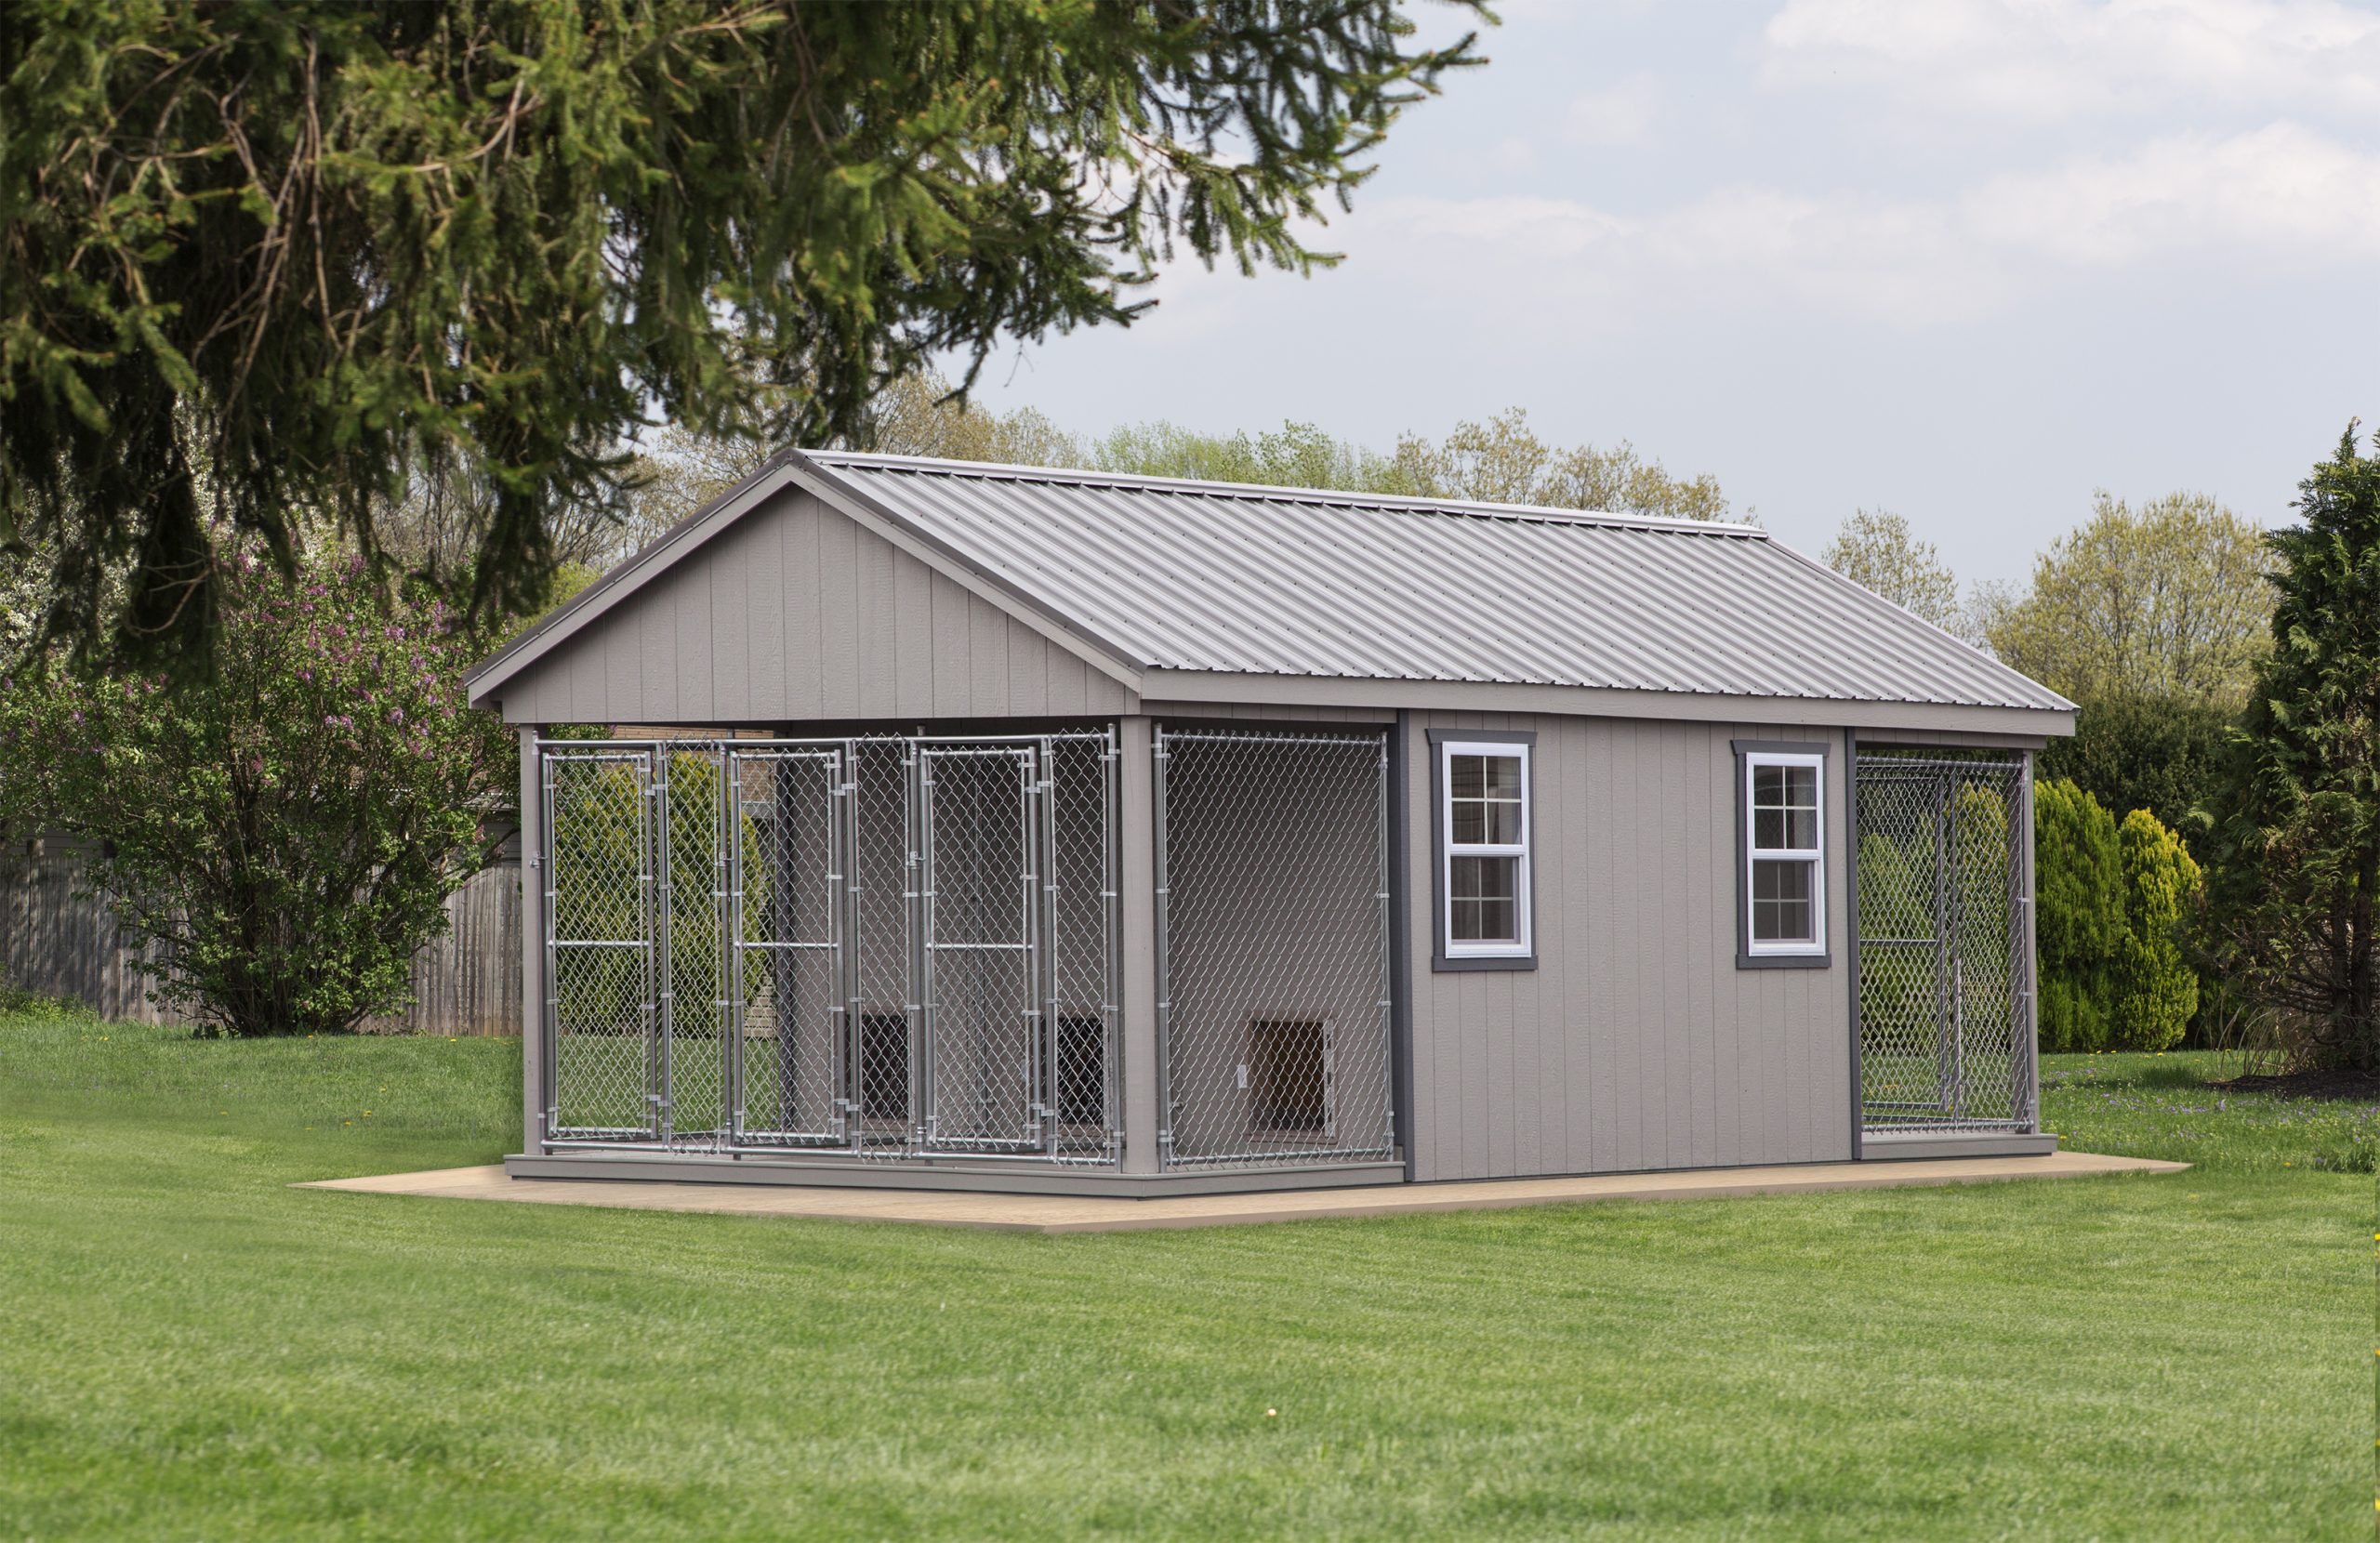 12x24 Commercial Kennel with 6 dog runs.